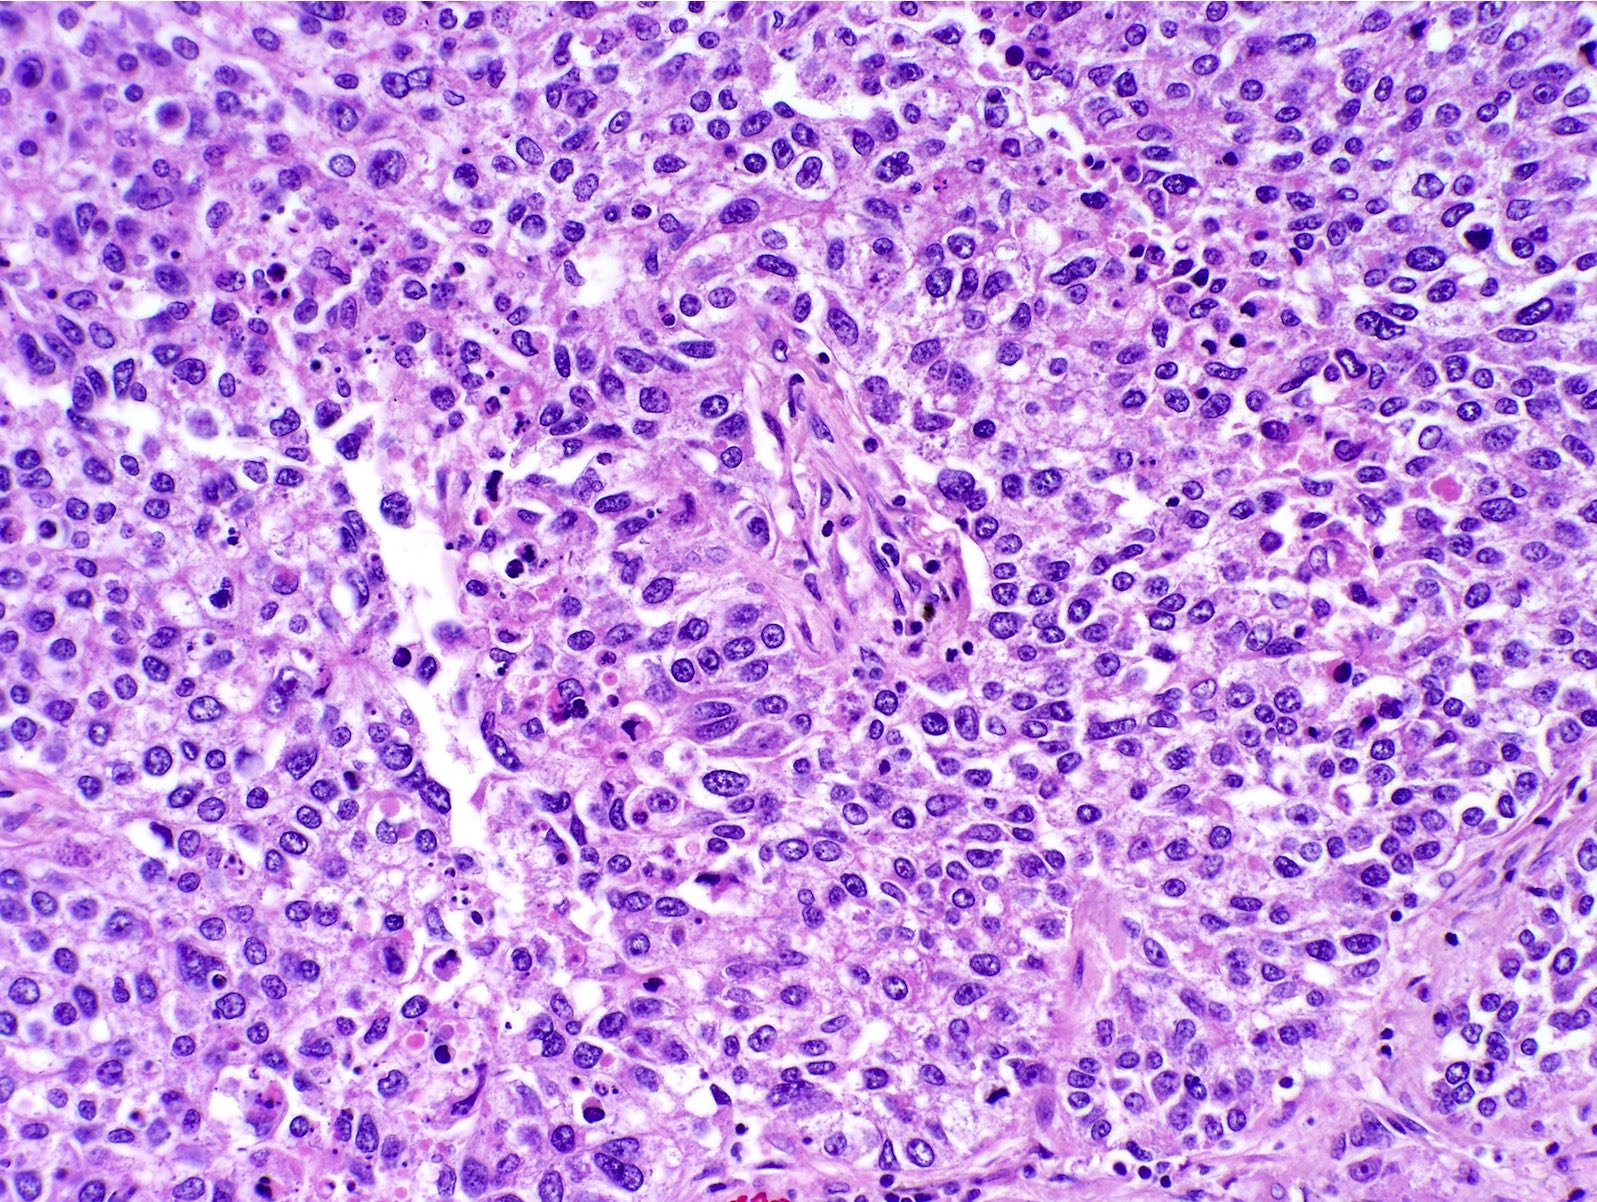 Solid pattern, cytologic features